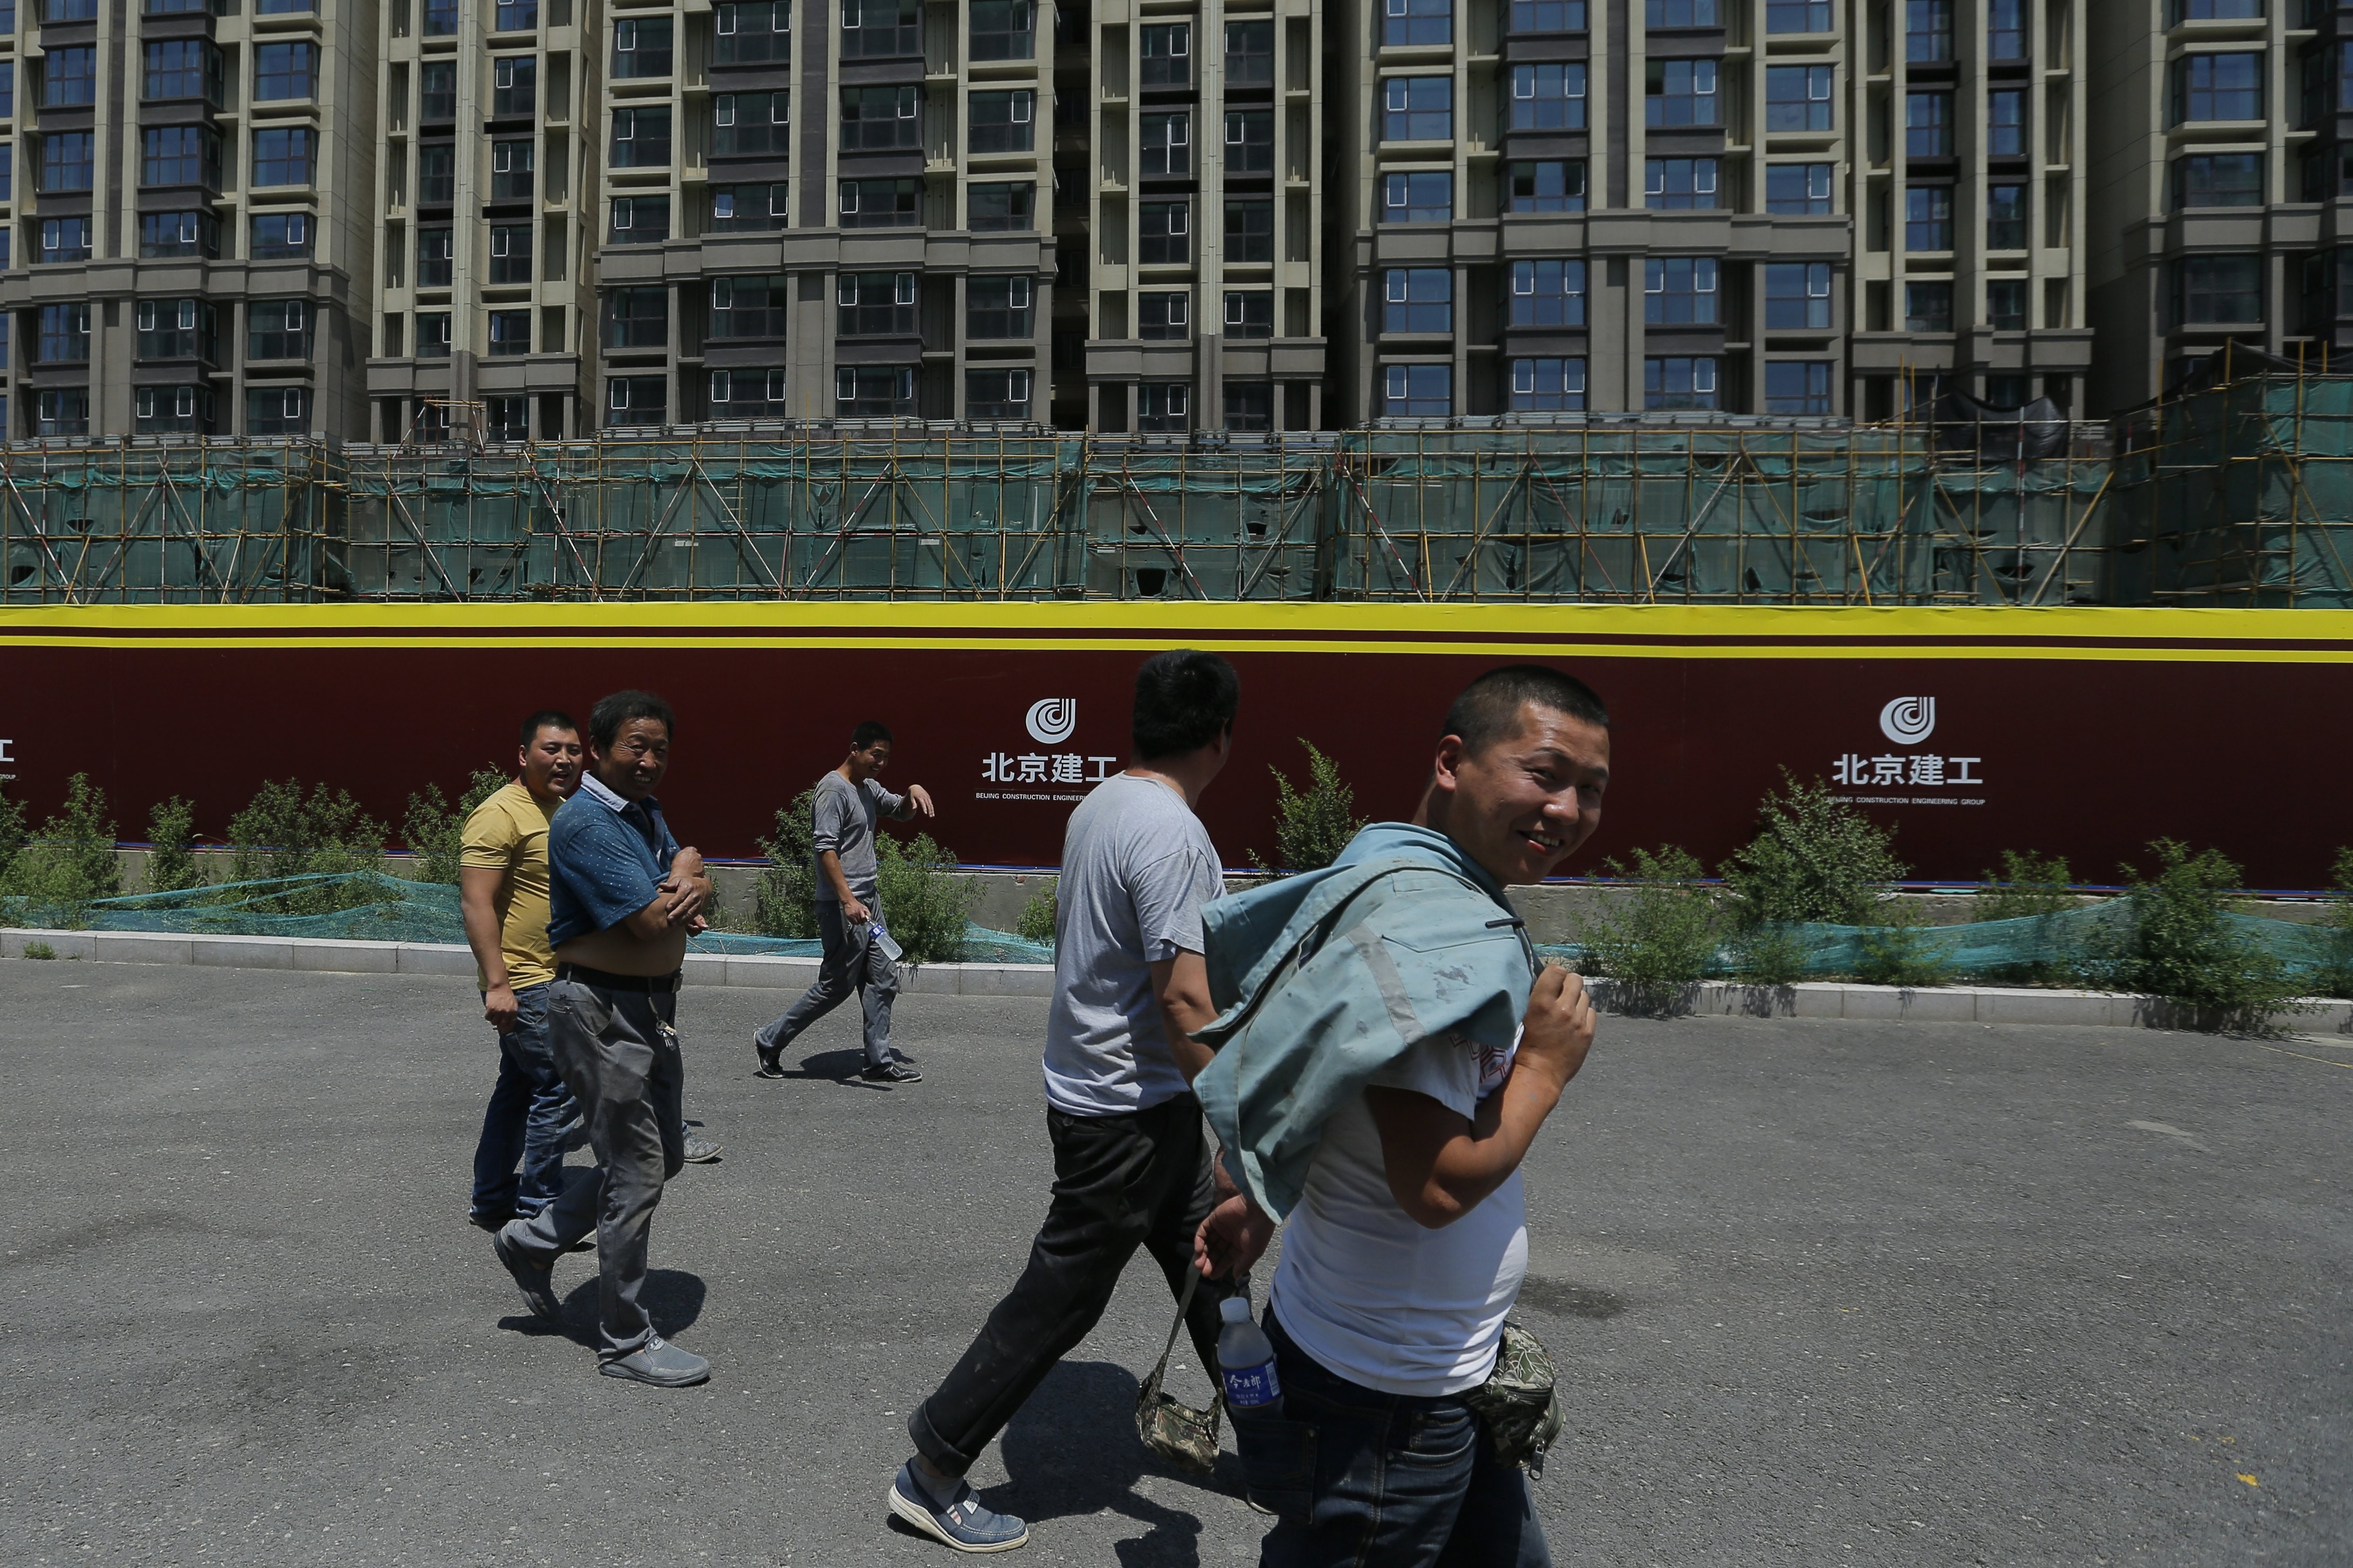 Migrant workers walk past a construction site in Beijing last month. Many Chinese who left their rural hometowns in search of jobs in the country’s booming coastal cities are now in need of new work as construction projects stall and trade volume decreases. Photo: EPA